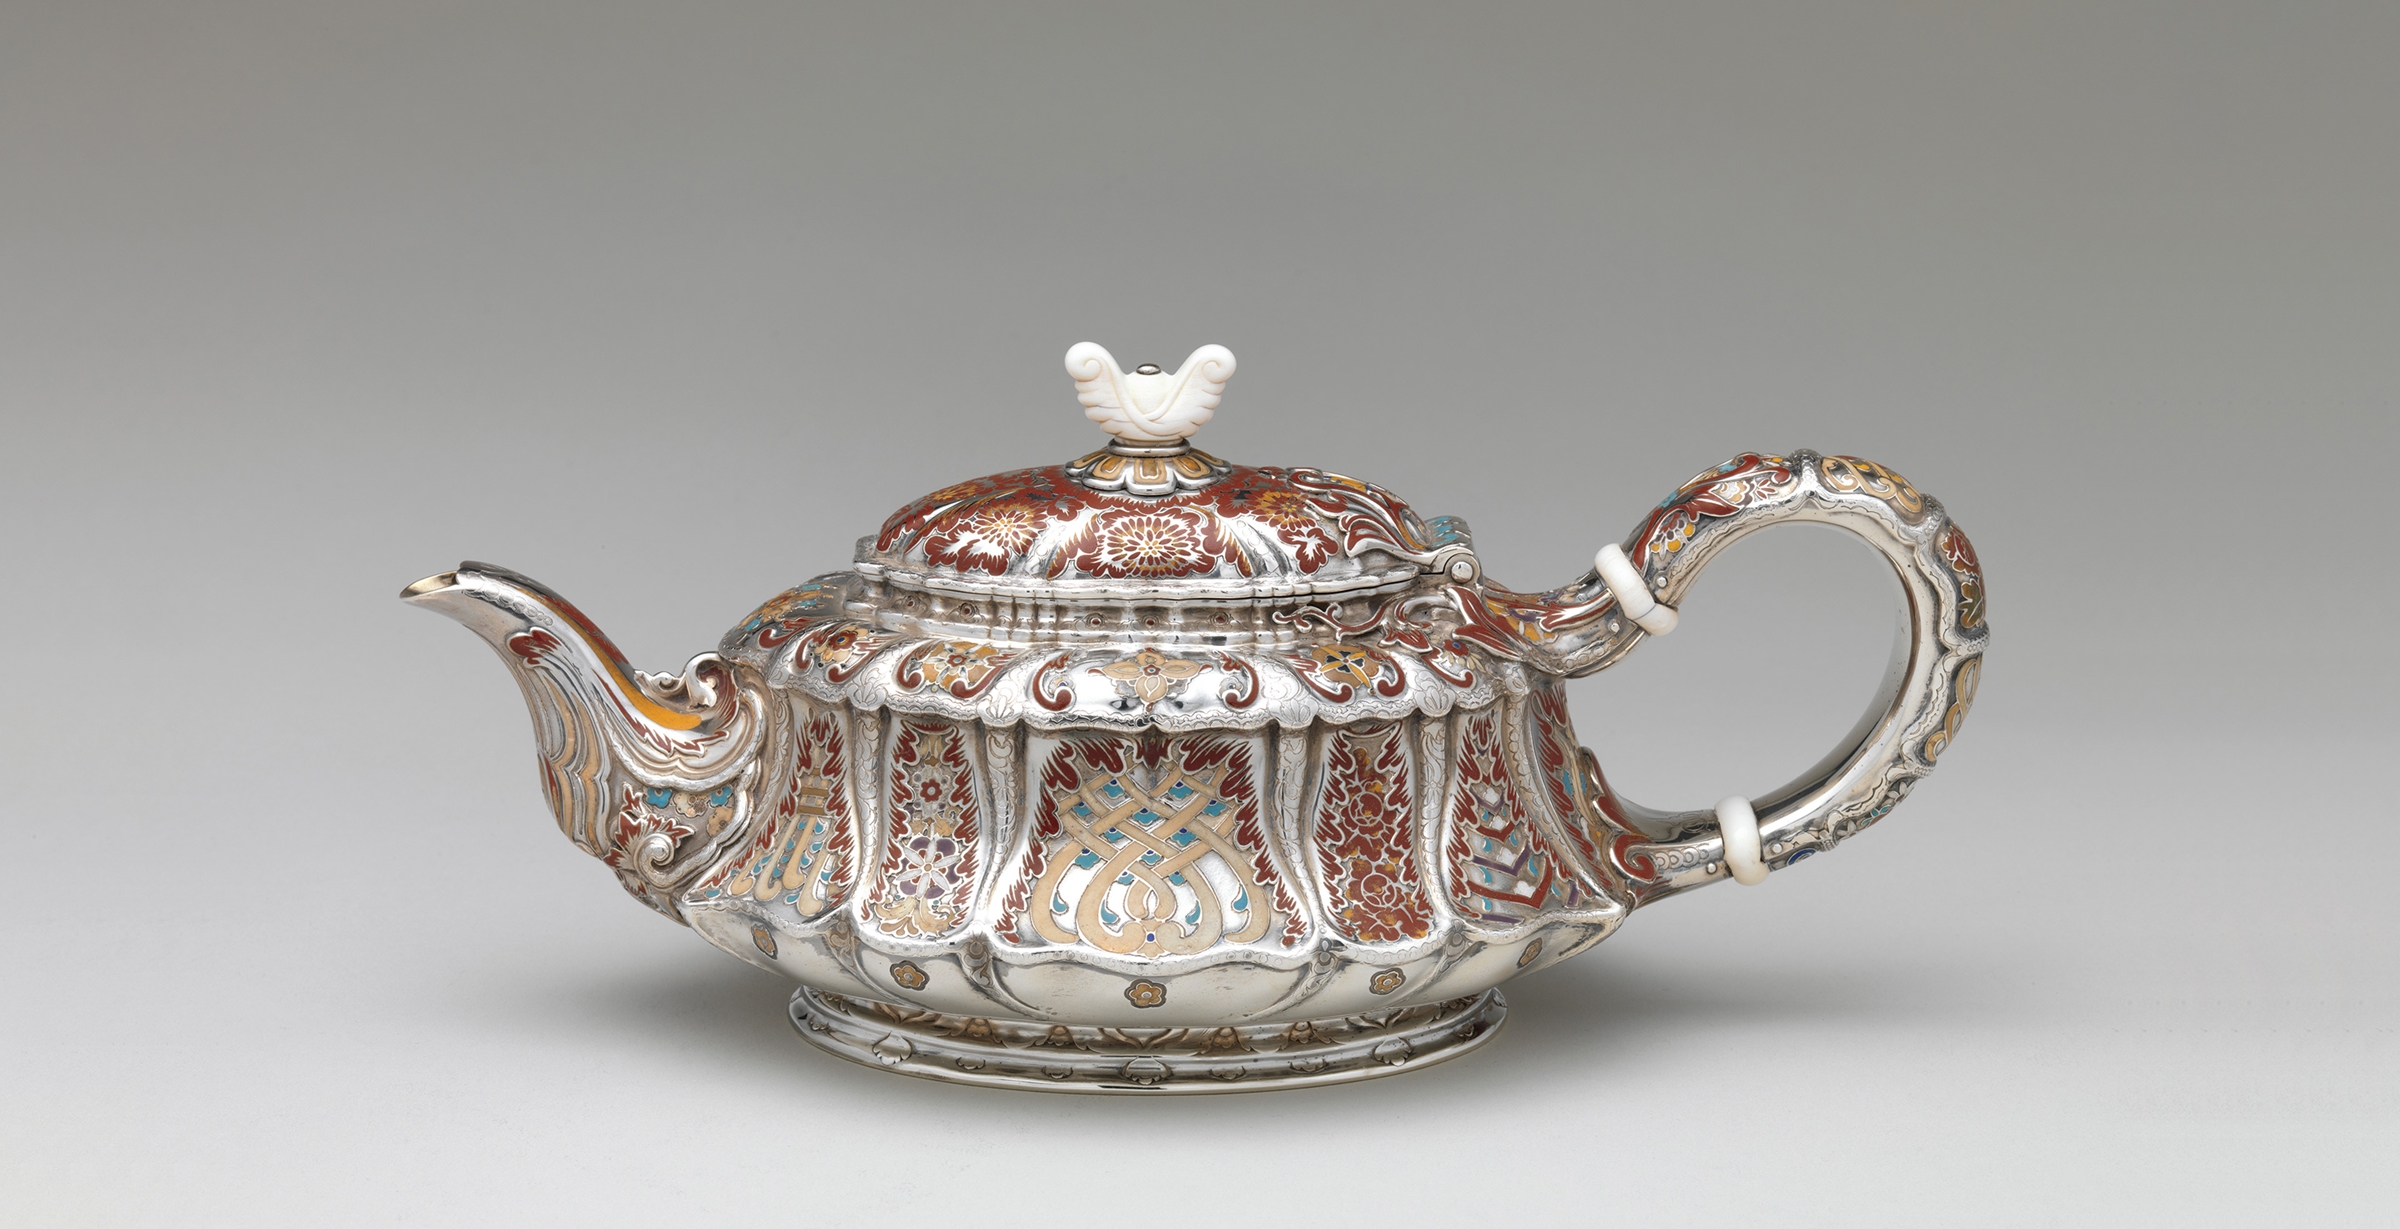 A short but elongated silver teapot with an ivory lid finial adorned with abstract floral motifs rendered in maroon, orange, taupe, and turquoise enamel.